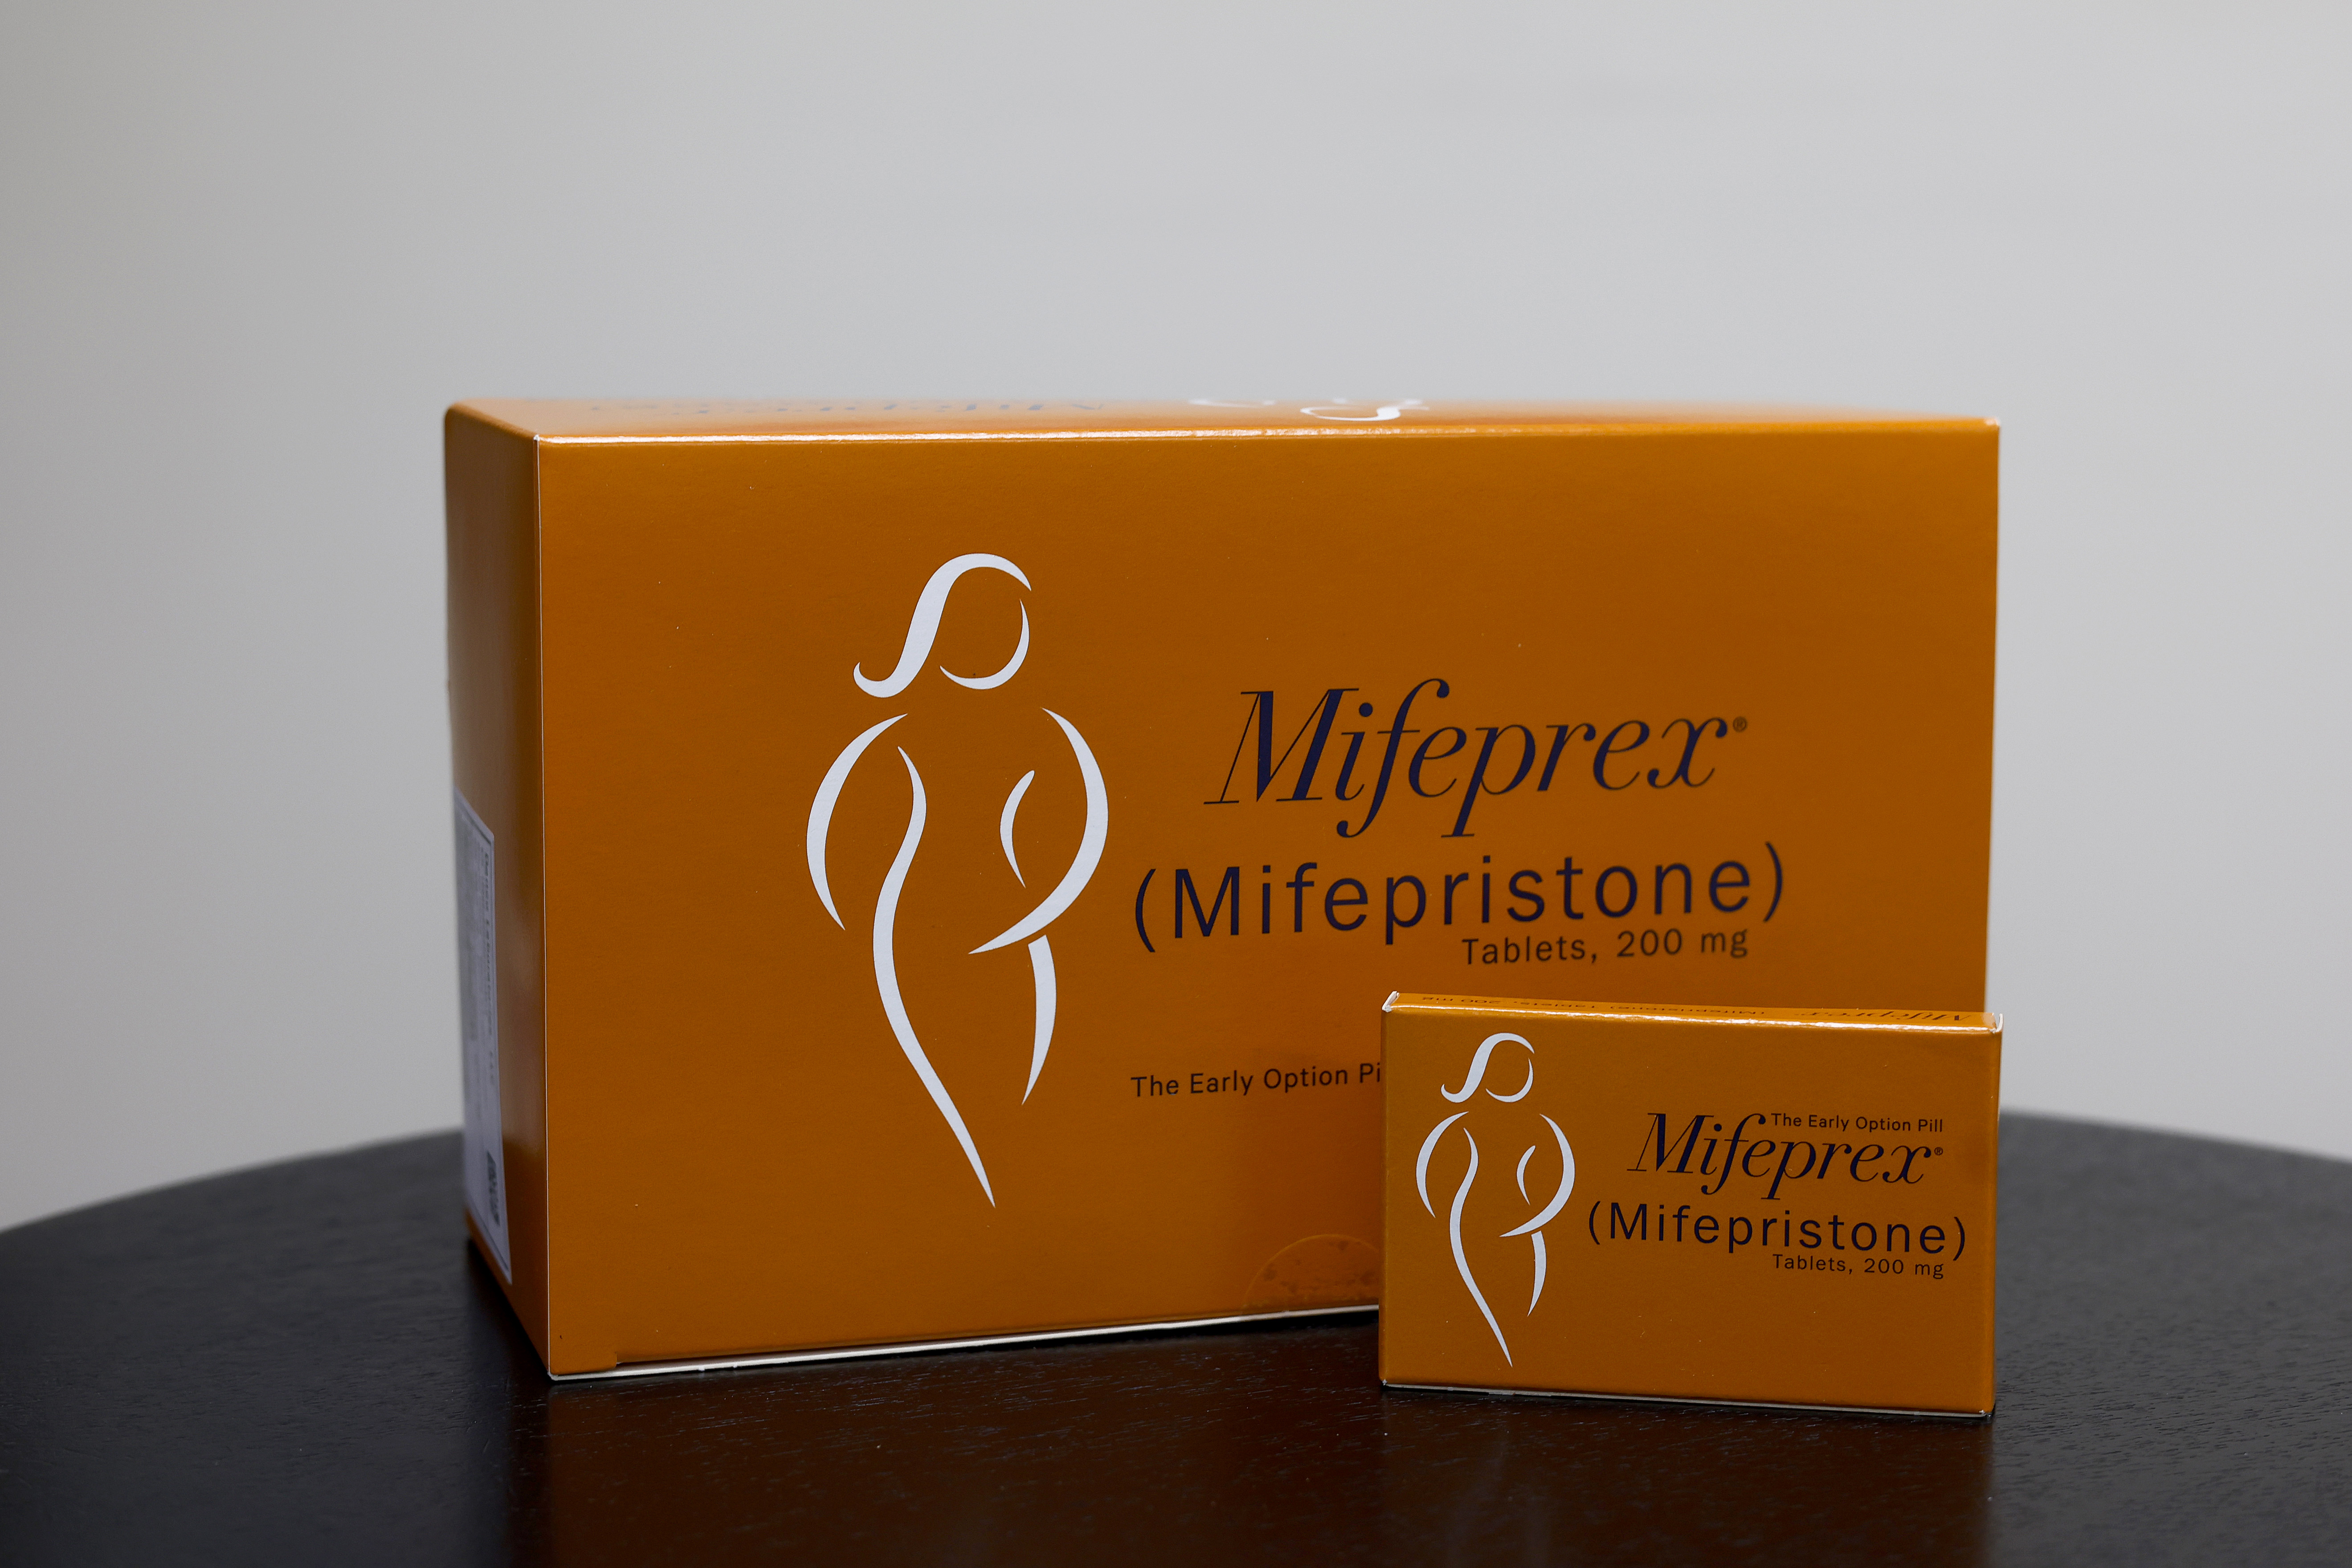 Mifepristone’s safety is on par with common over-the-counter pain relievers like ibuprofen and acetaminophen, studies show.